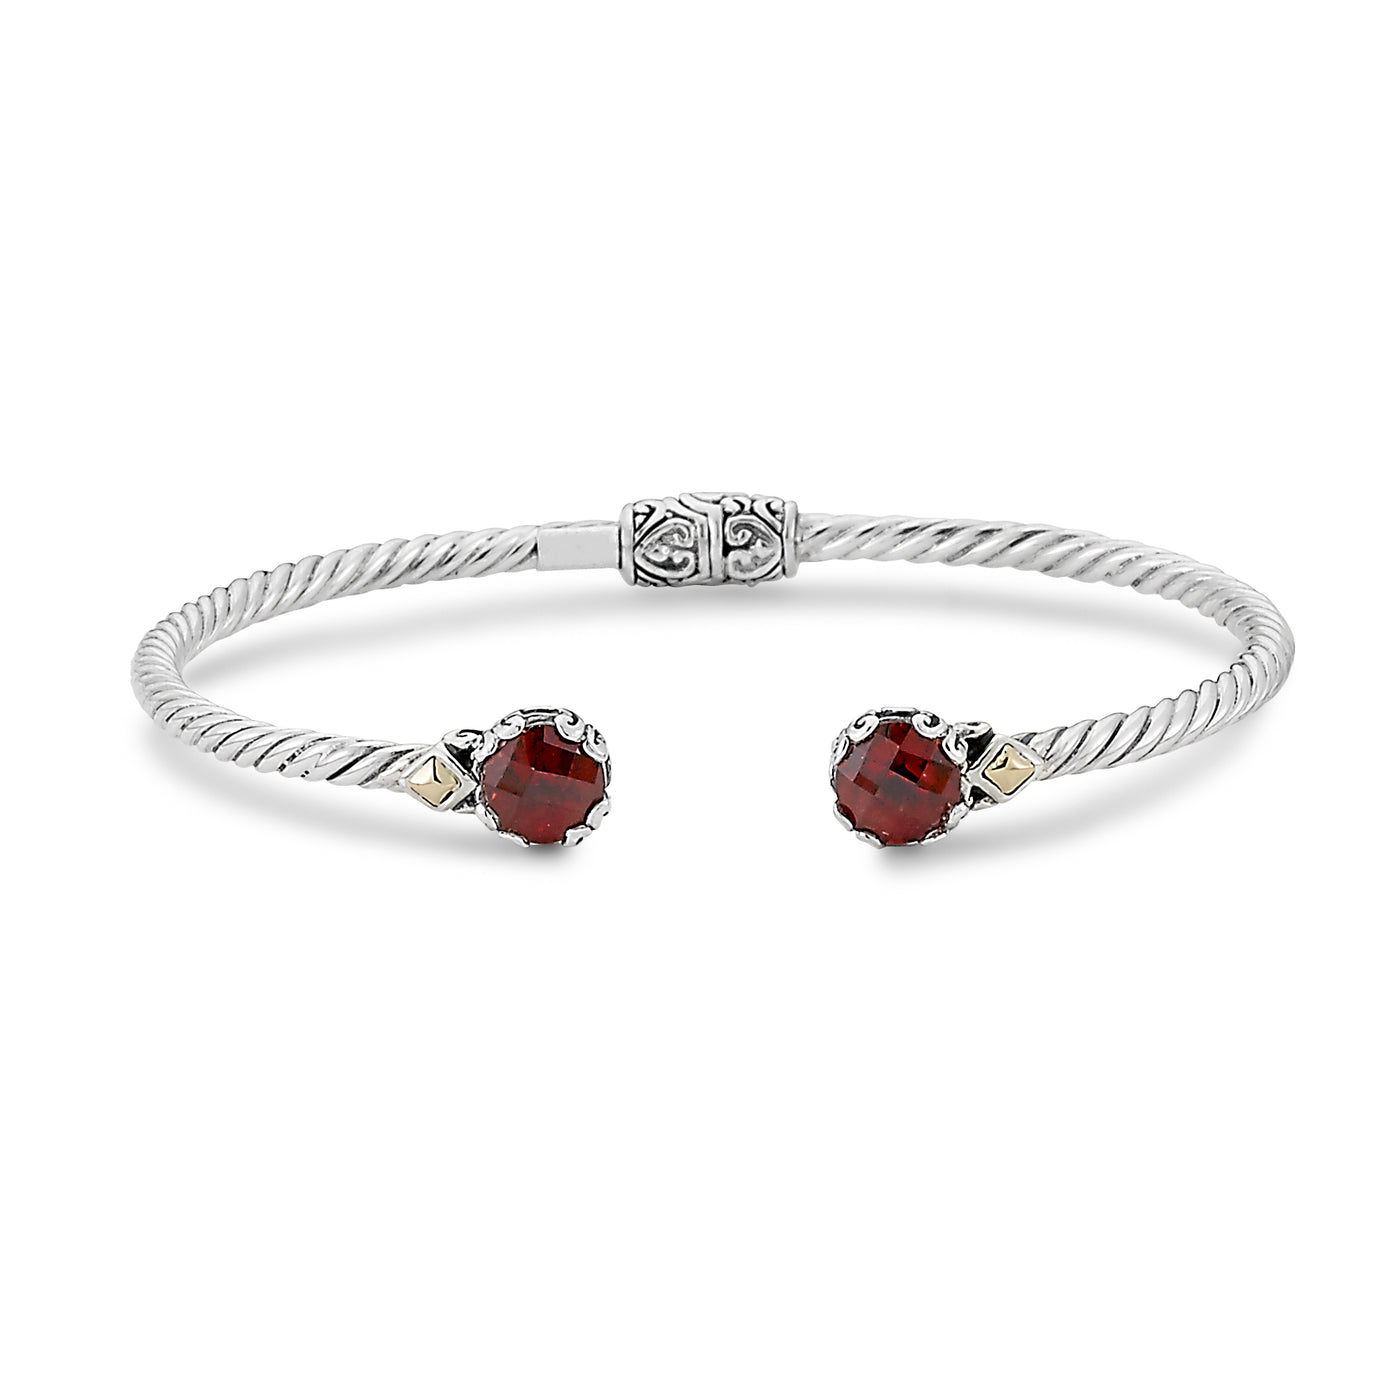 SS/18K 7MM ROUND GARNET TWISTED CABLE BANGLE IN 3MM